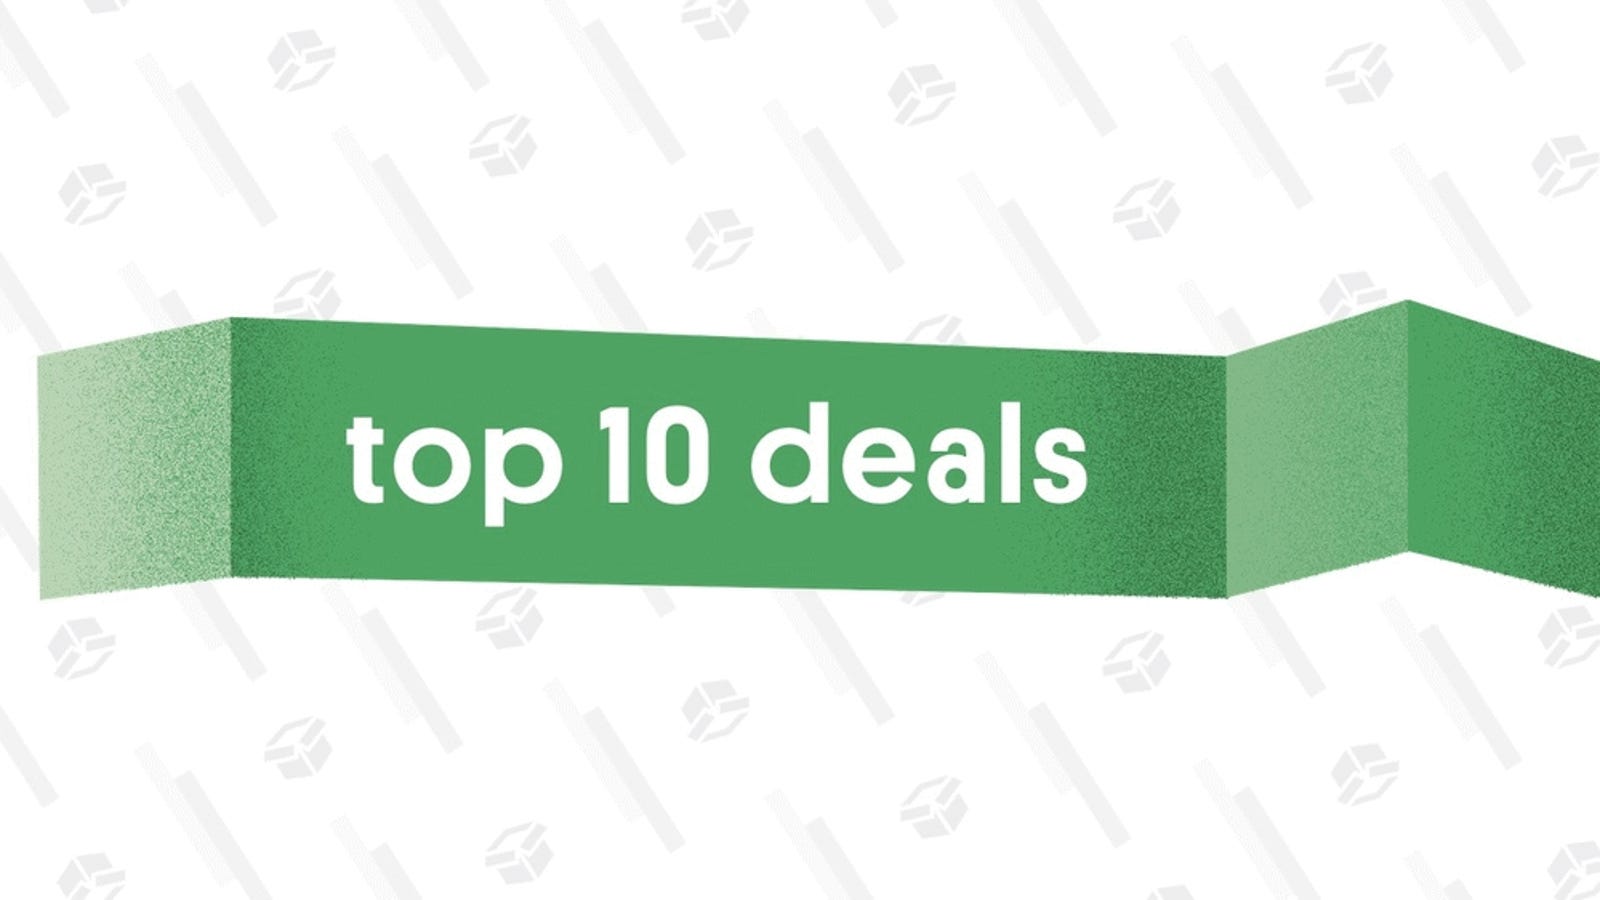 photo of The 10 Best Deals of October 15, 2018 image